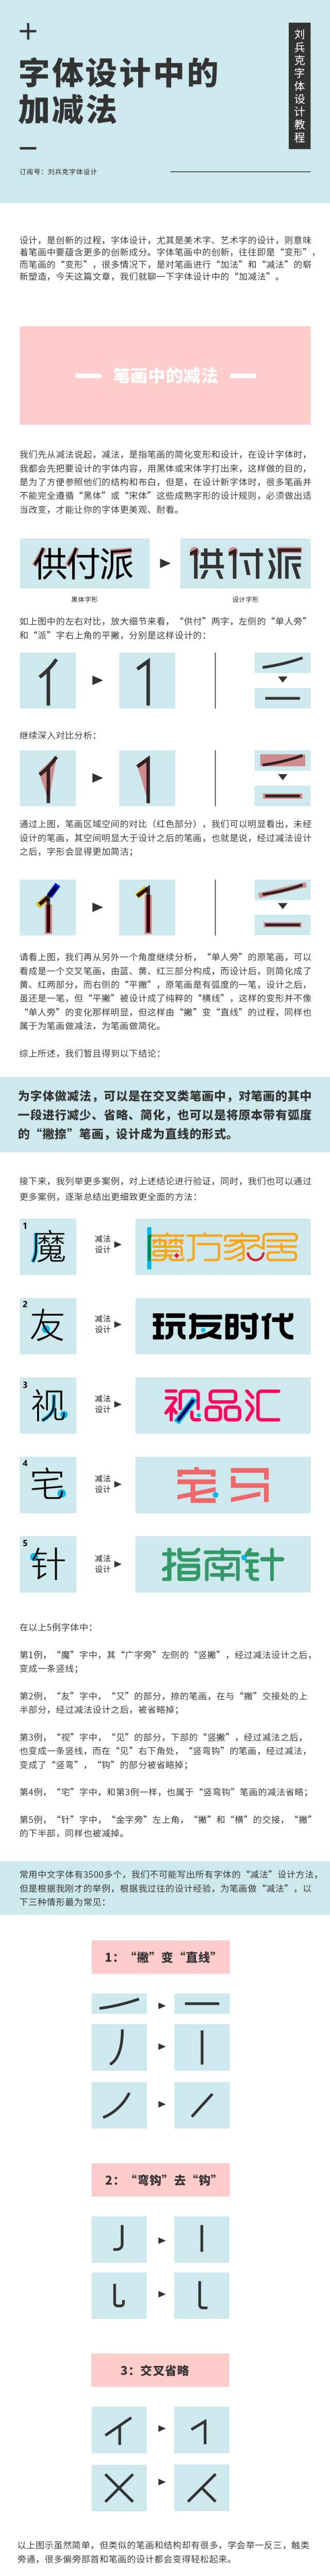 Detailed analysis of addition and subtraction skills in Chinese font design